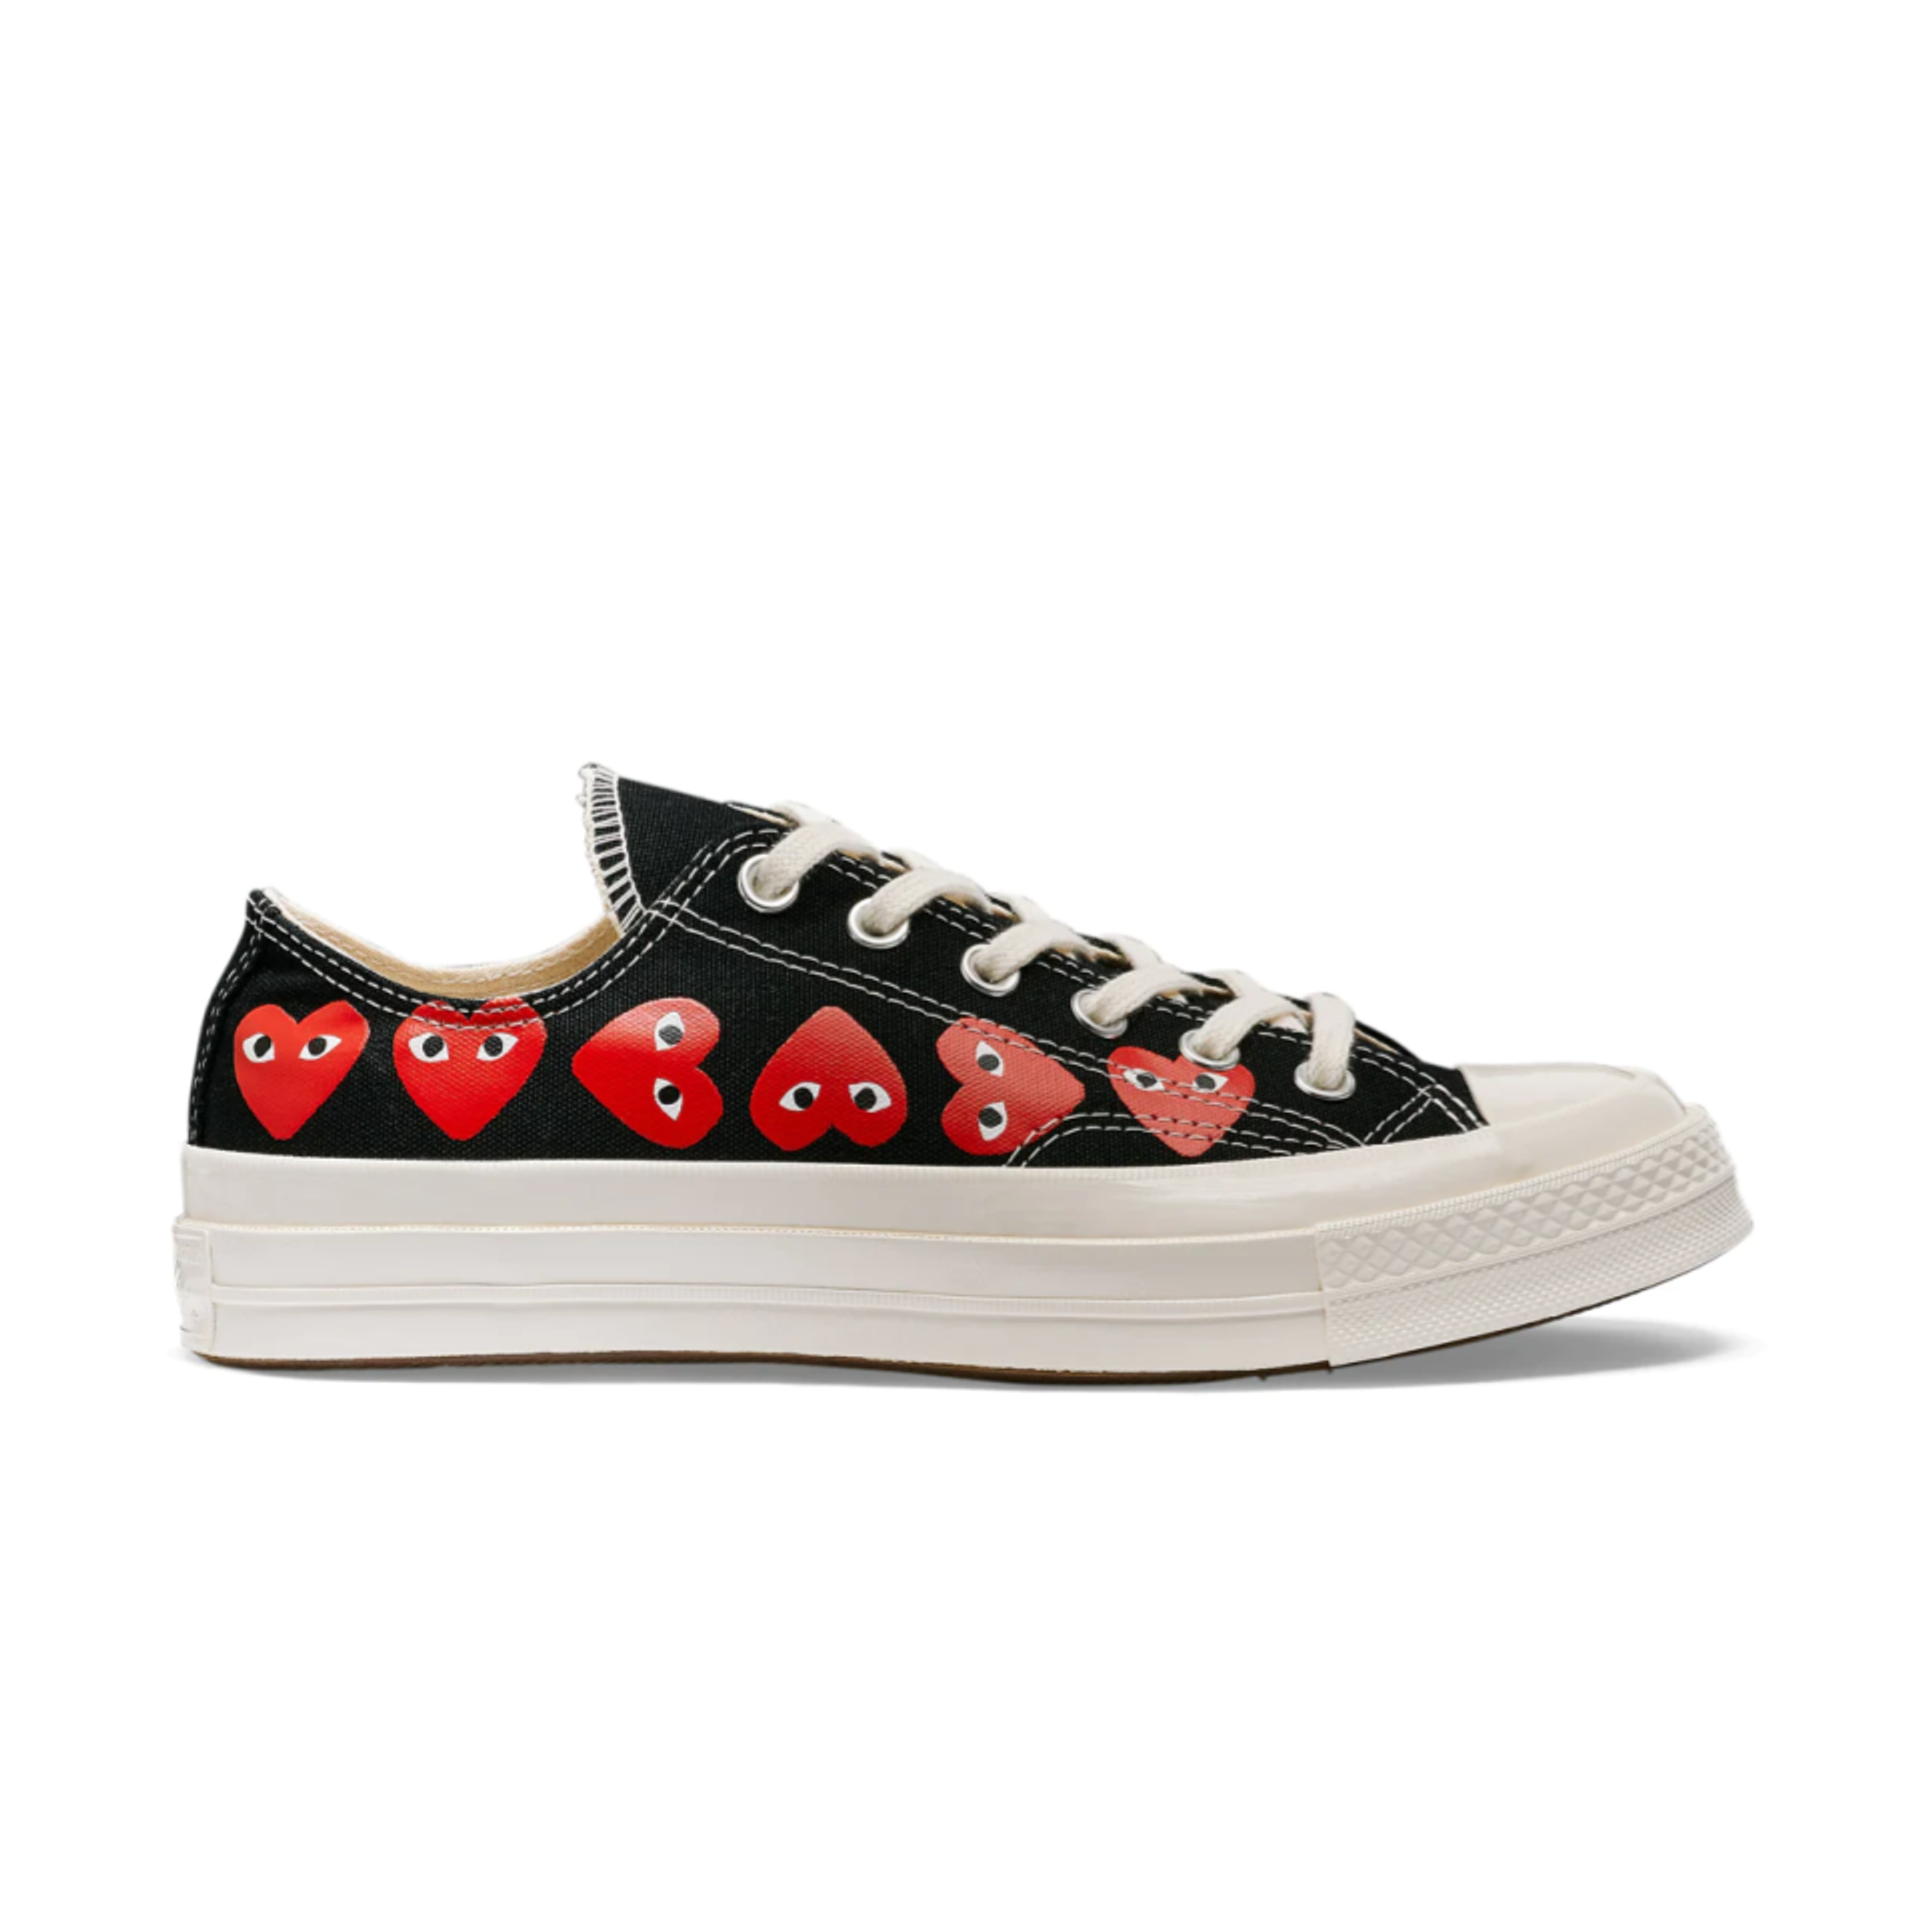 Comme des Garcons x Converse Chuck Taylor All Star 70 Low 'Multi Red Heart' Black